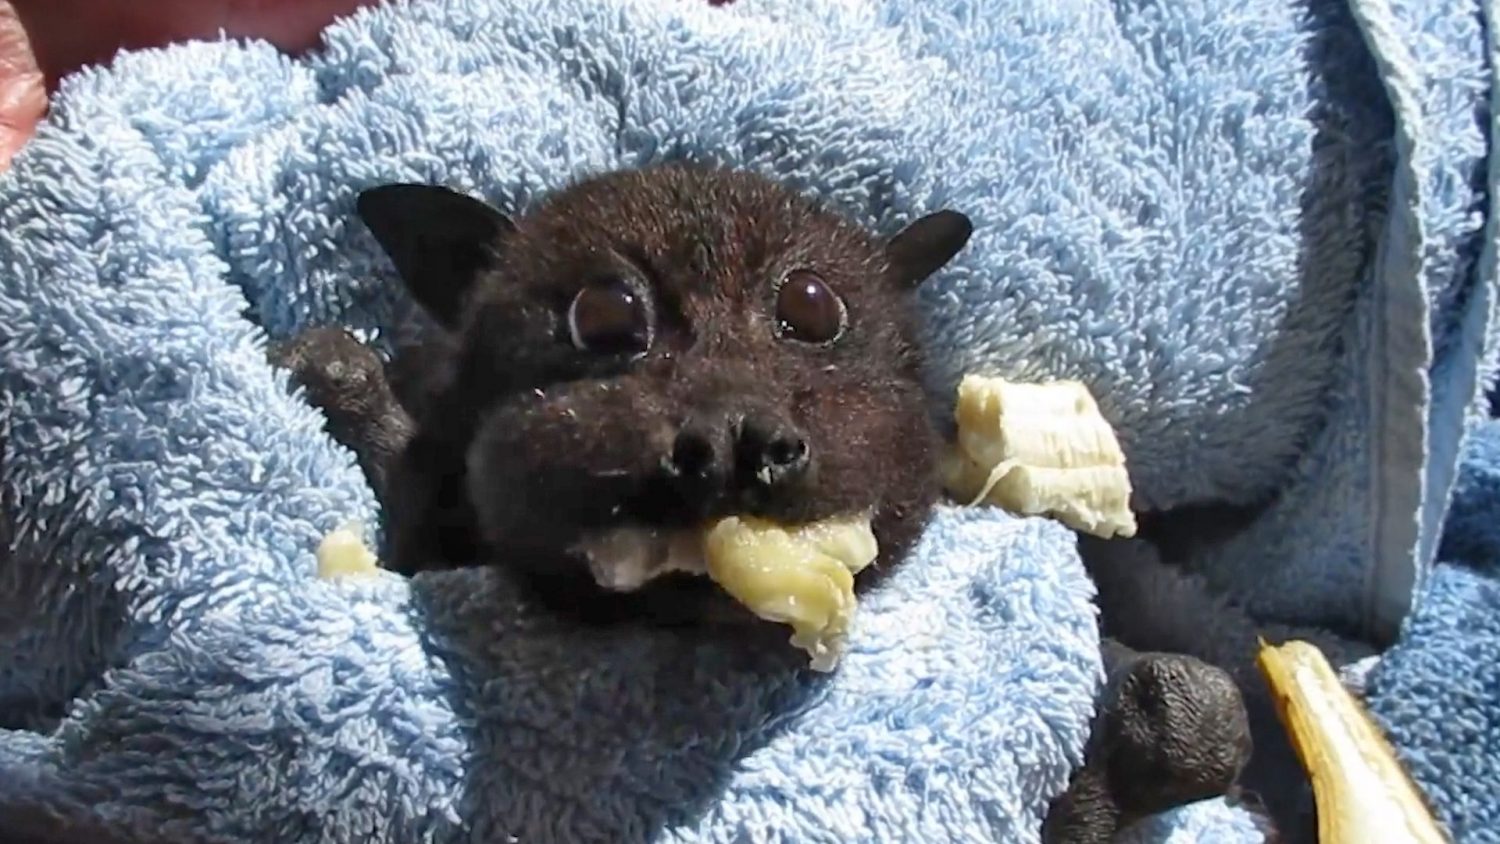 rescued baby bat stuffs her cheeks with banana after being hit by car, and this video will make your day